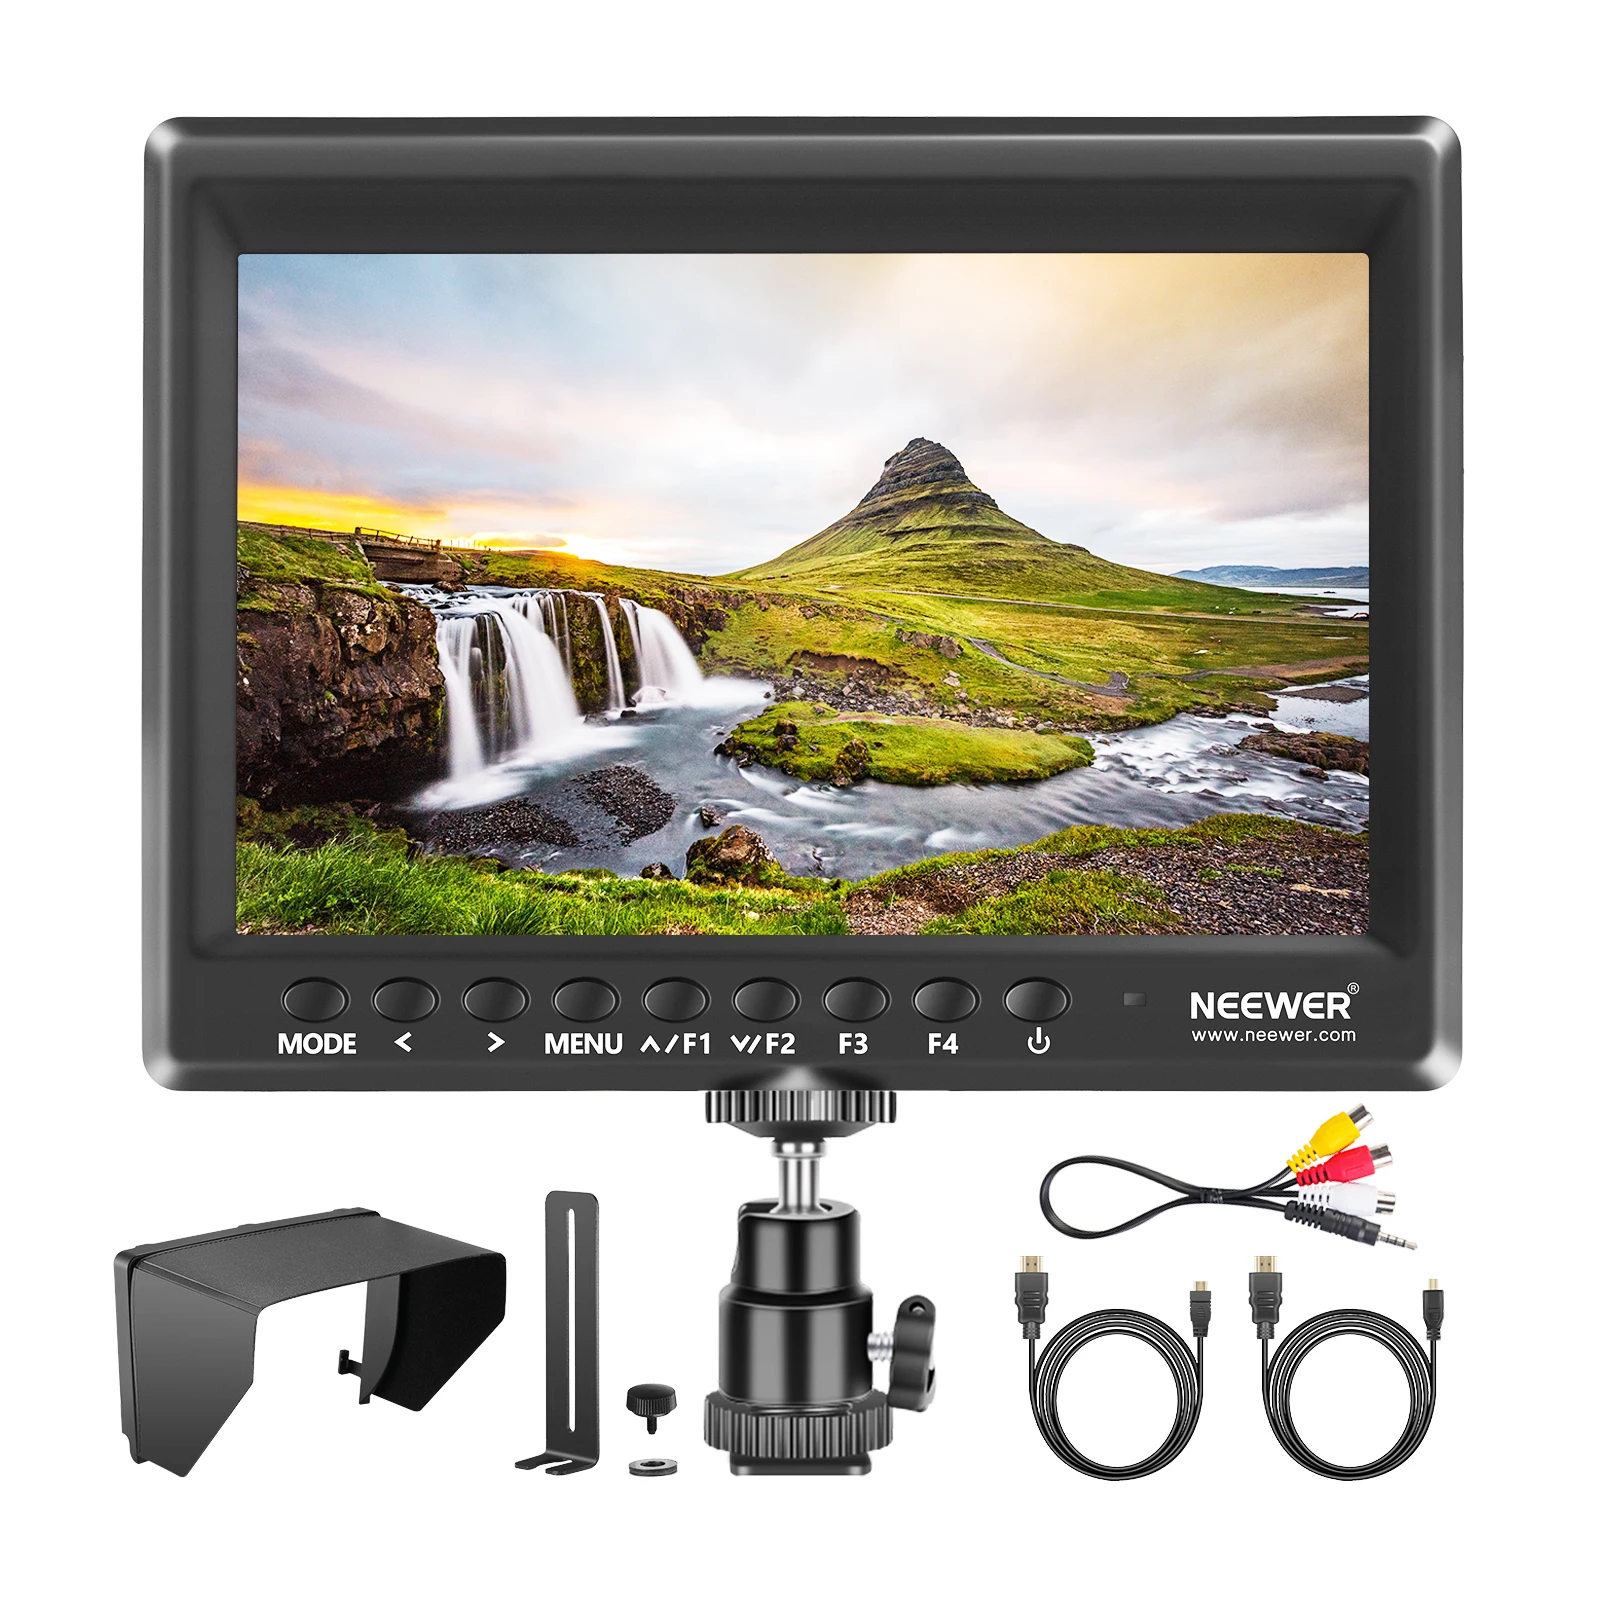 

Neewer F100 7 Inch Camera Field Monitor Video Assist Slim IPS 1280x800 HDMI Input 1080p with Sunshade for DSLR Cameras